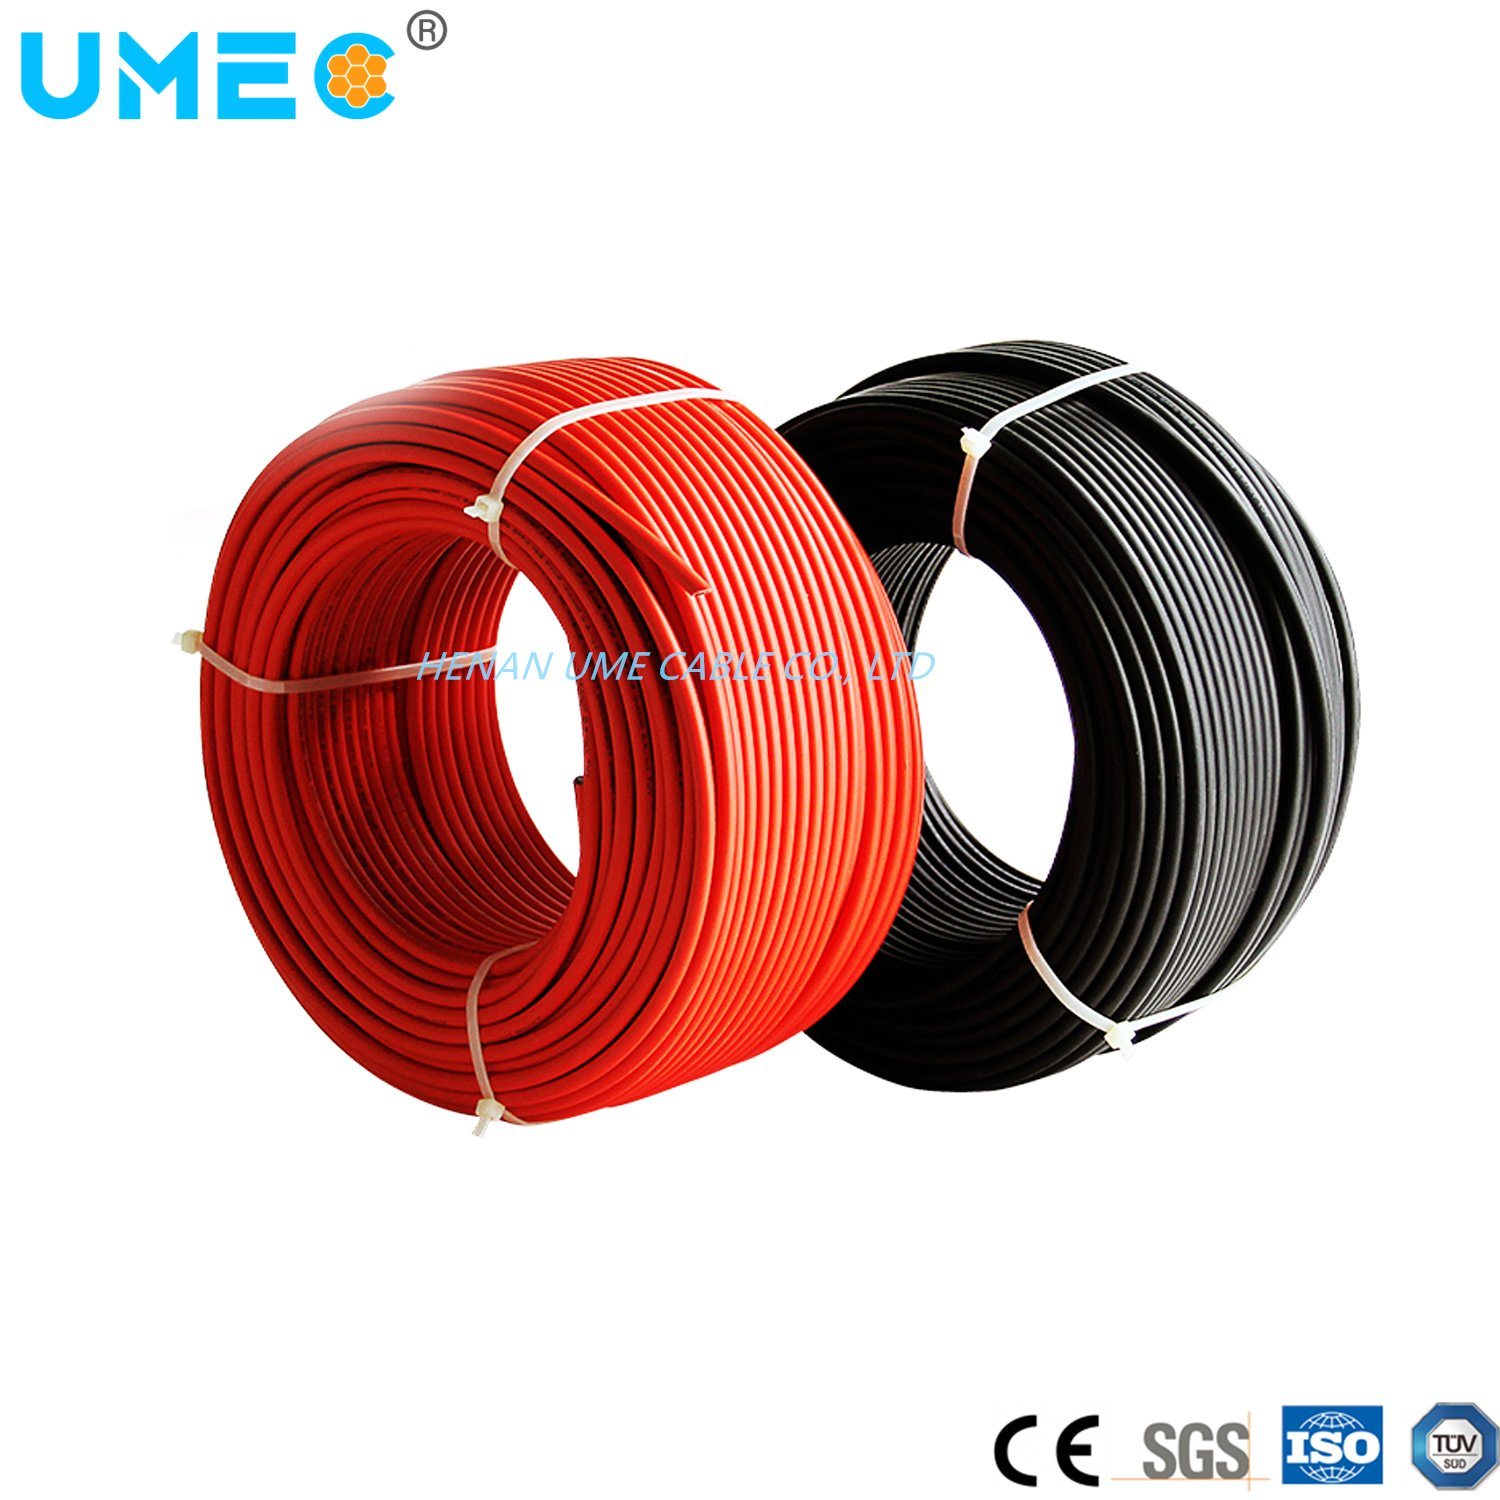 CE ISO SGS Approval Solar Cable UV Resistance Solar Wire 6mm2 PV Cable 10AWG Halogen-Free Solar Cable